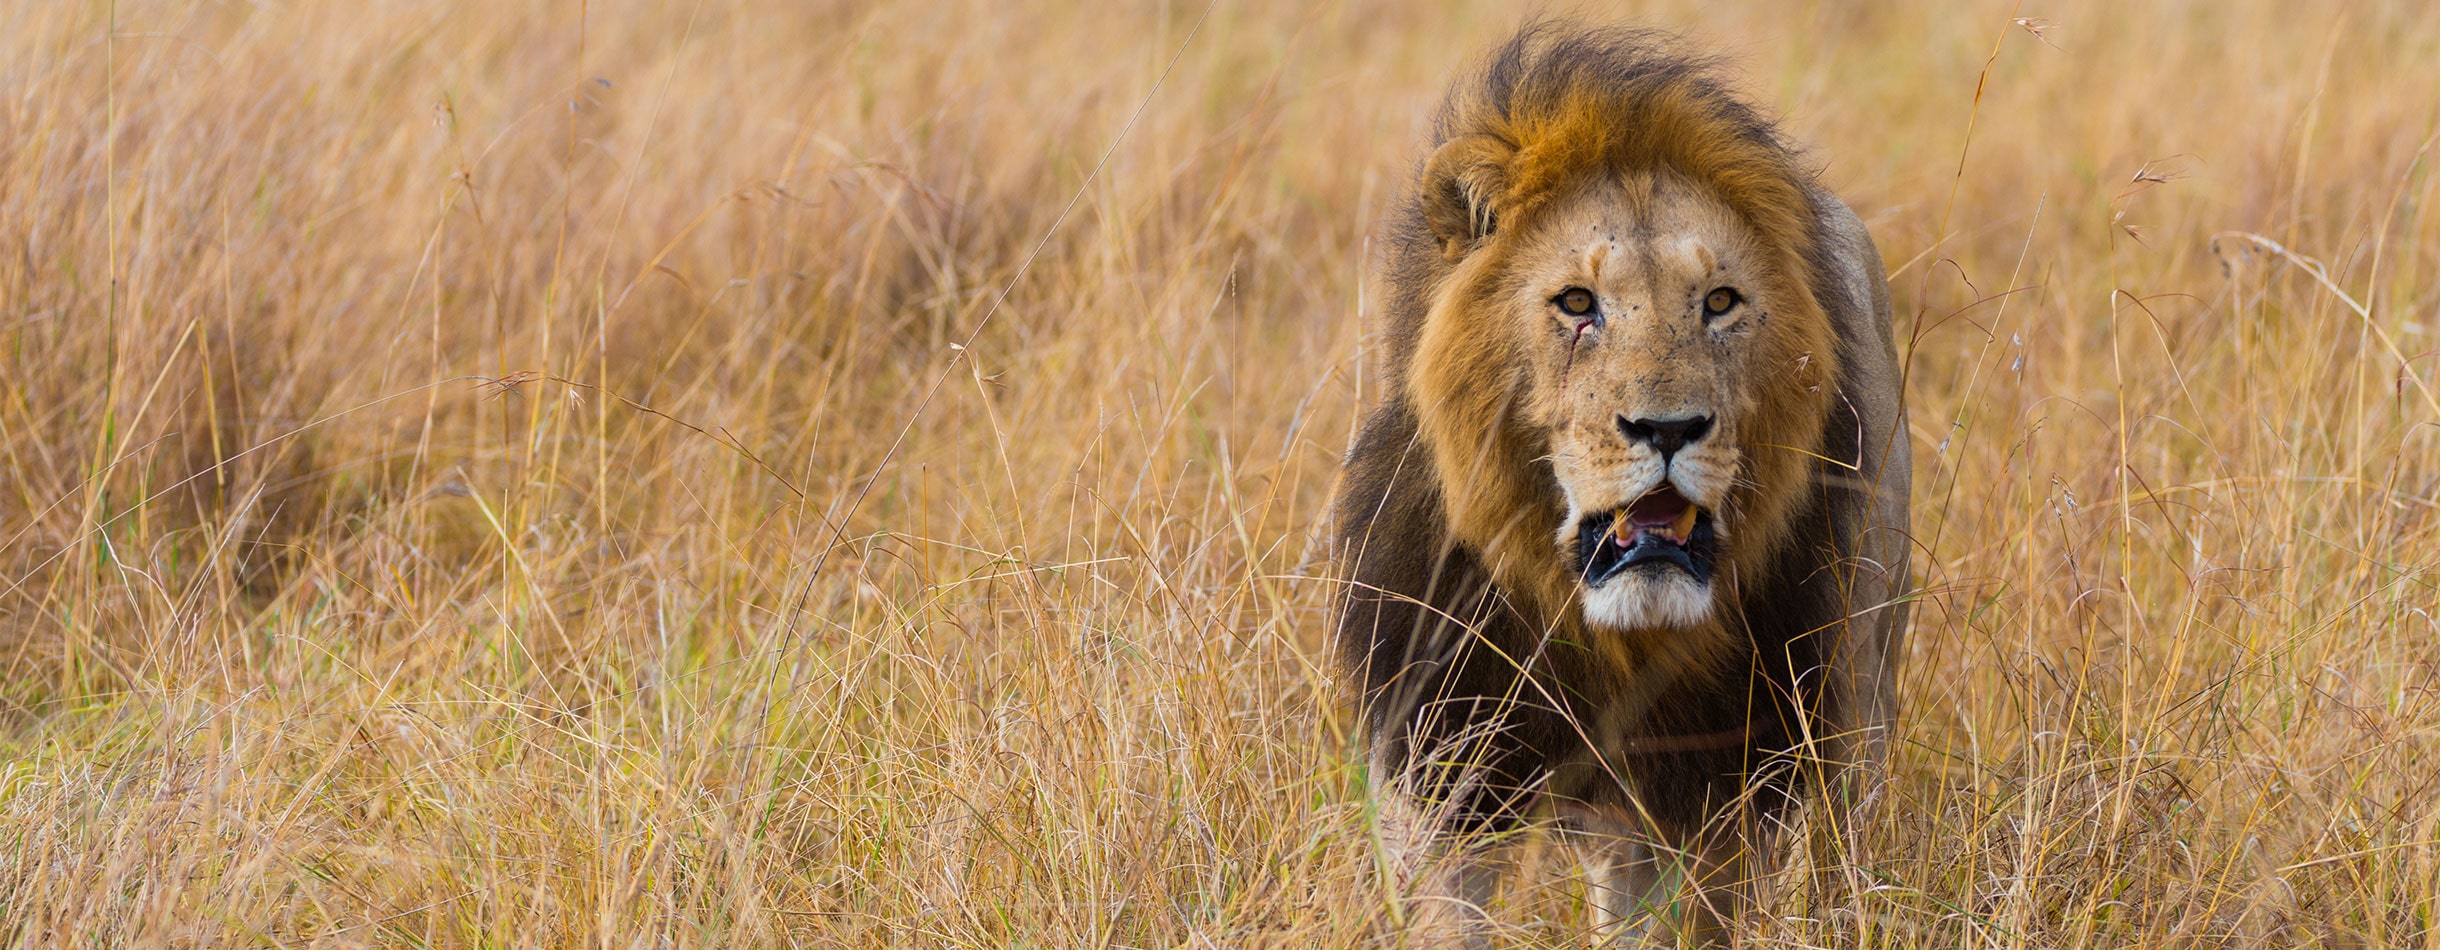 Male Lion in the grass, Africa 